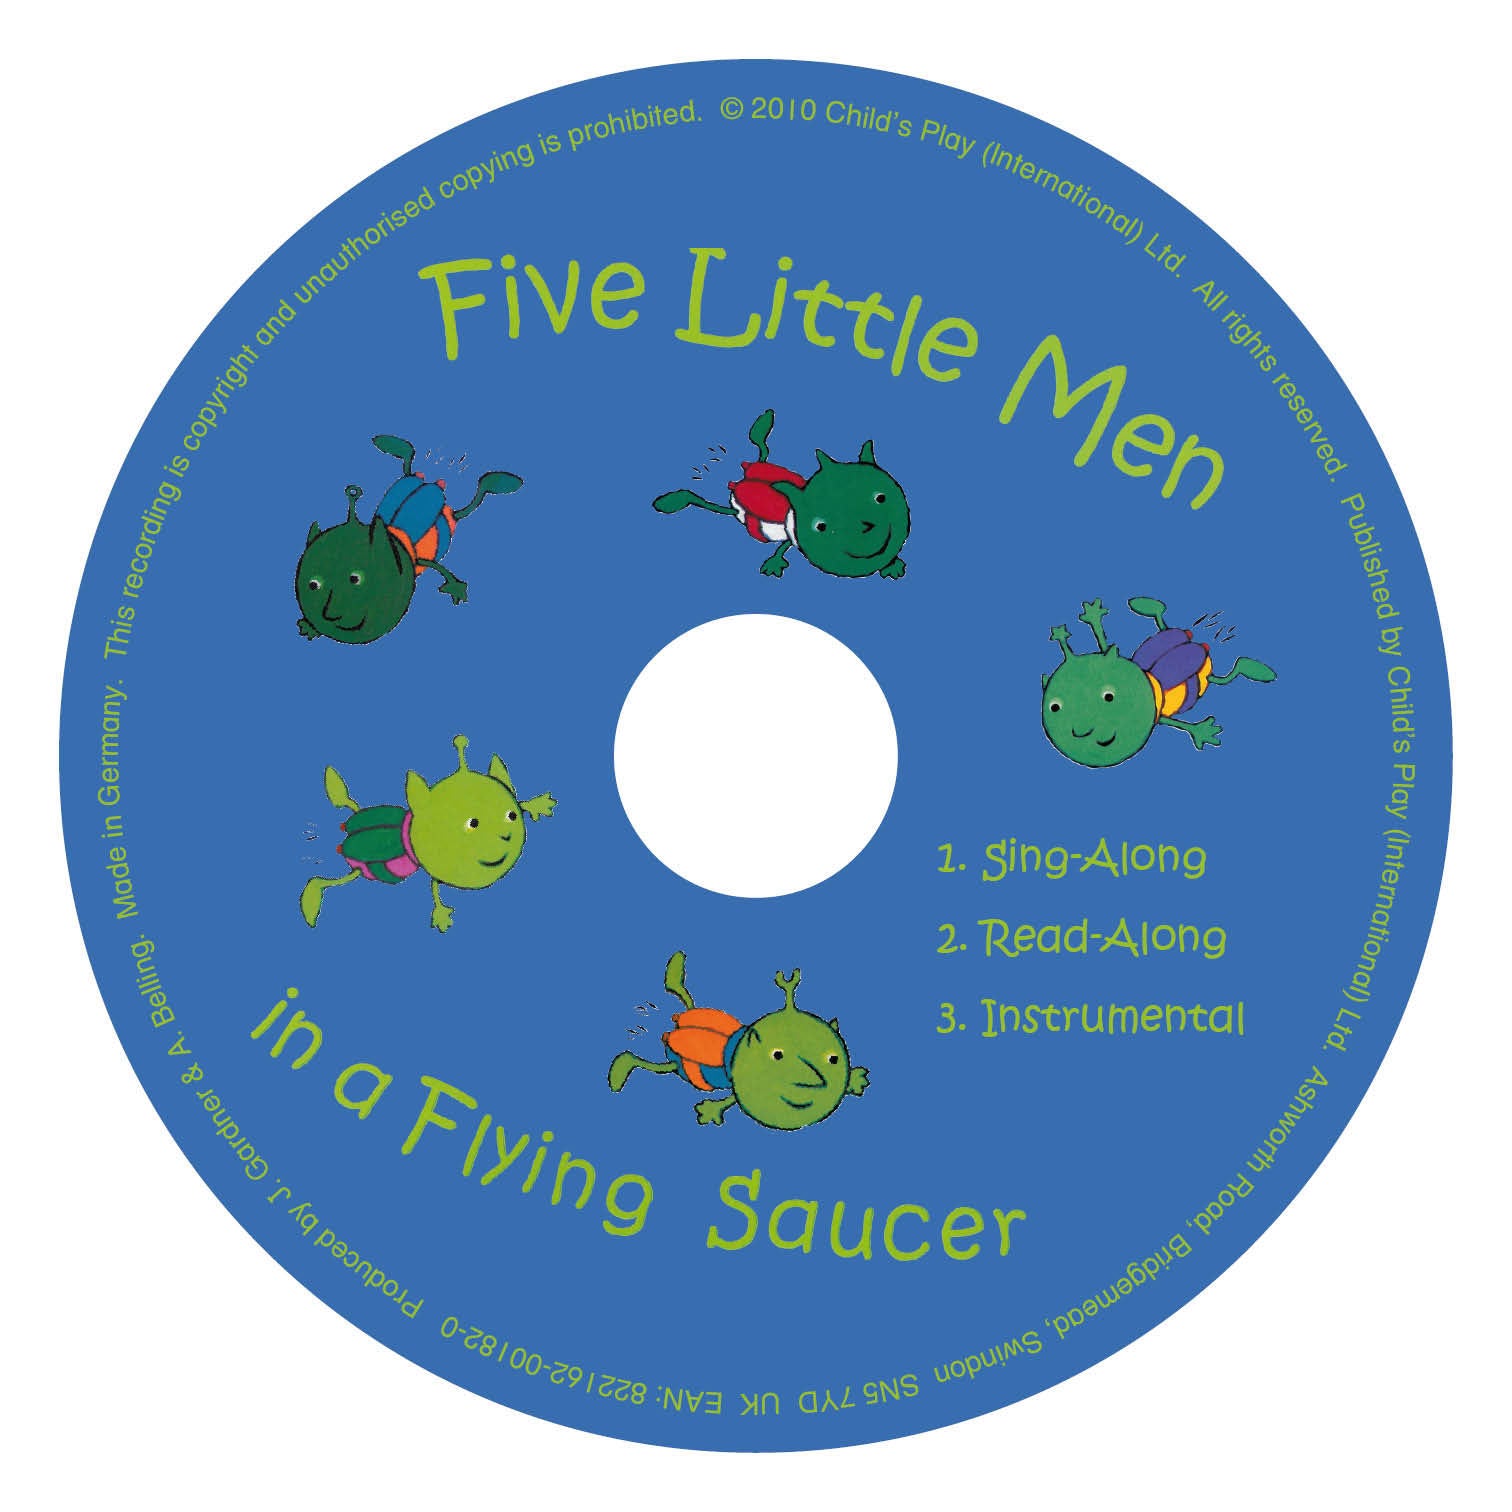 Five Little Men in a Flying Saucer CD – Child's Play